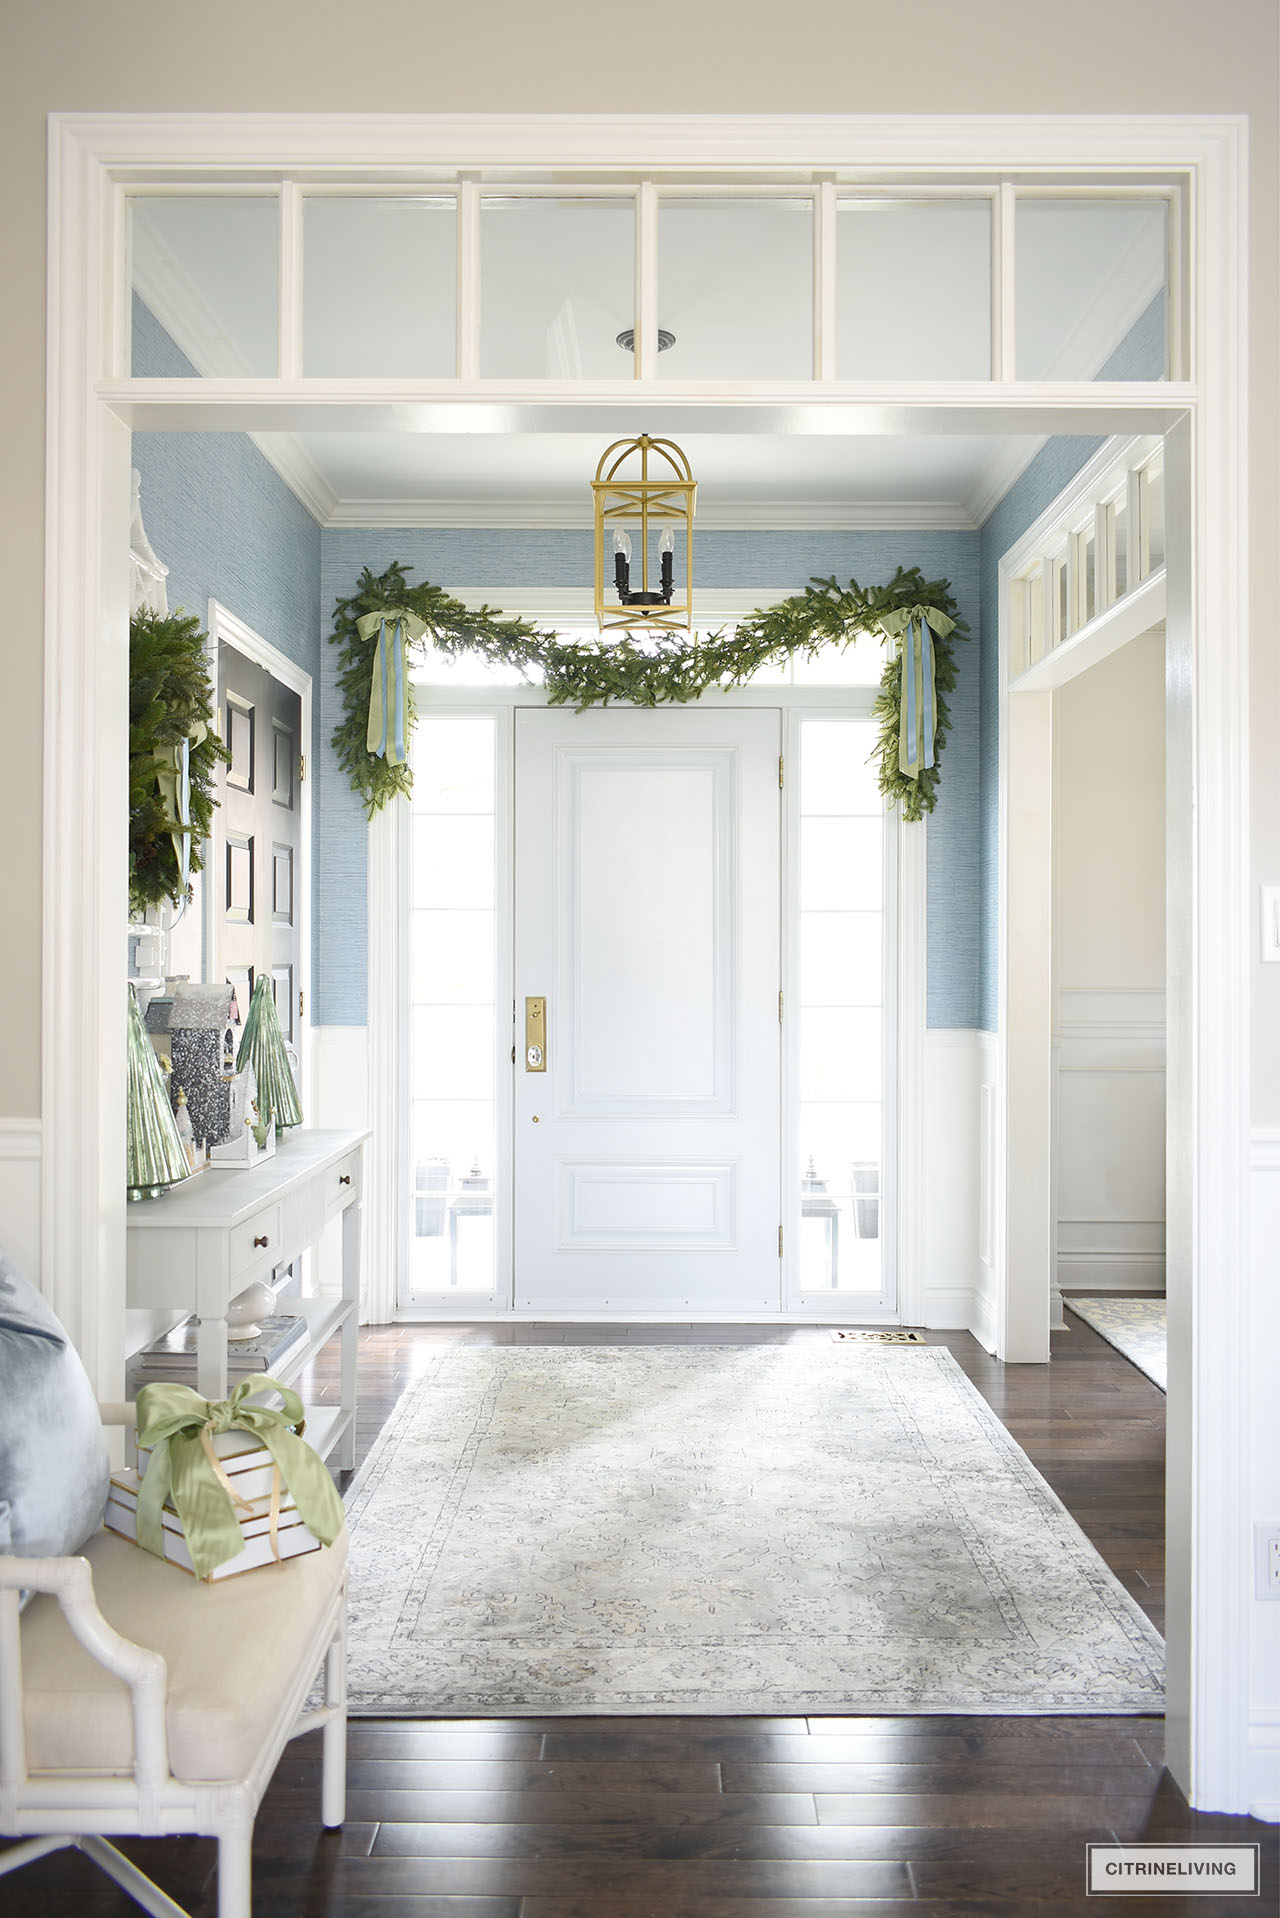 Christmas decor in an elegant entryway, with garland swagged over the front door, embellished with light green and light blue bows on each corner.